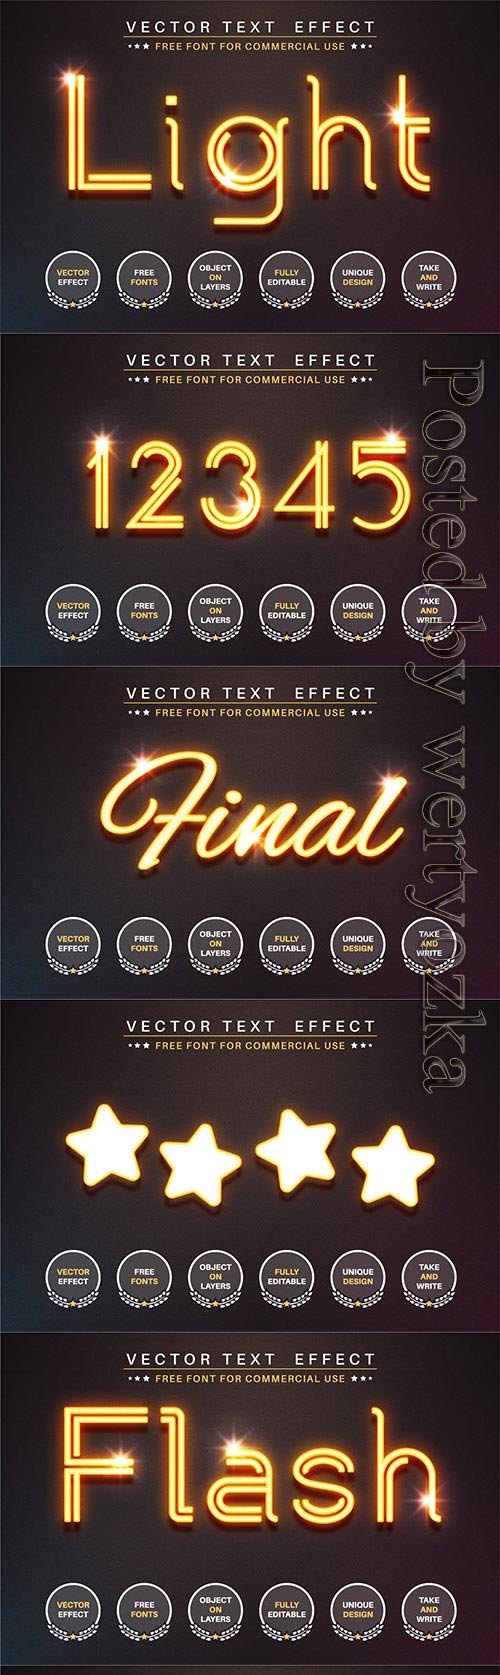 Glowing wire - editable text effect, font style